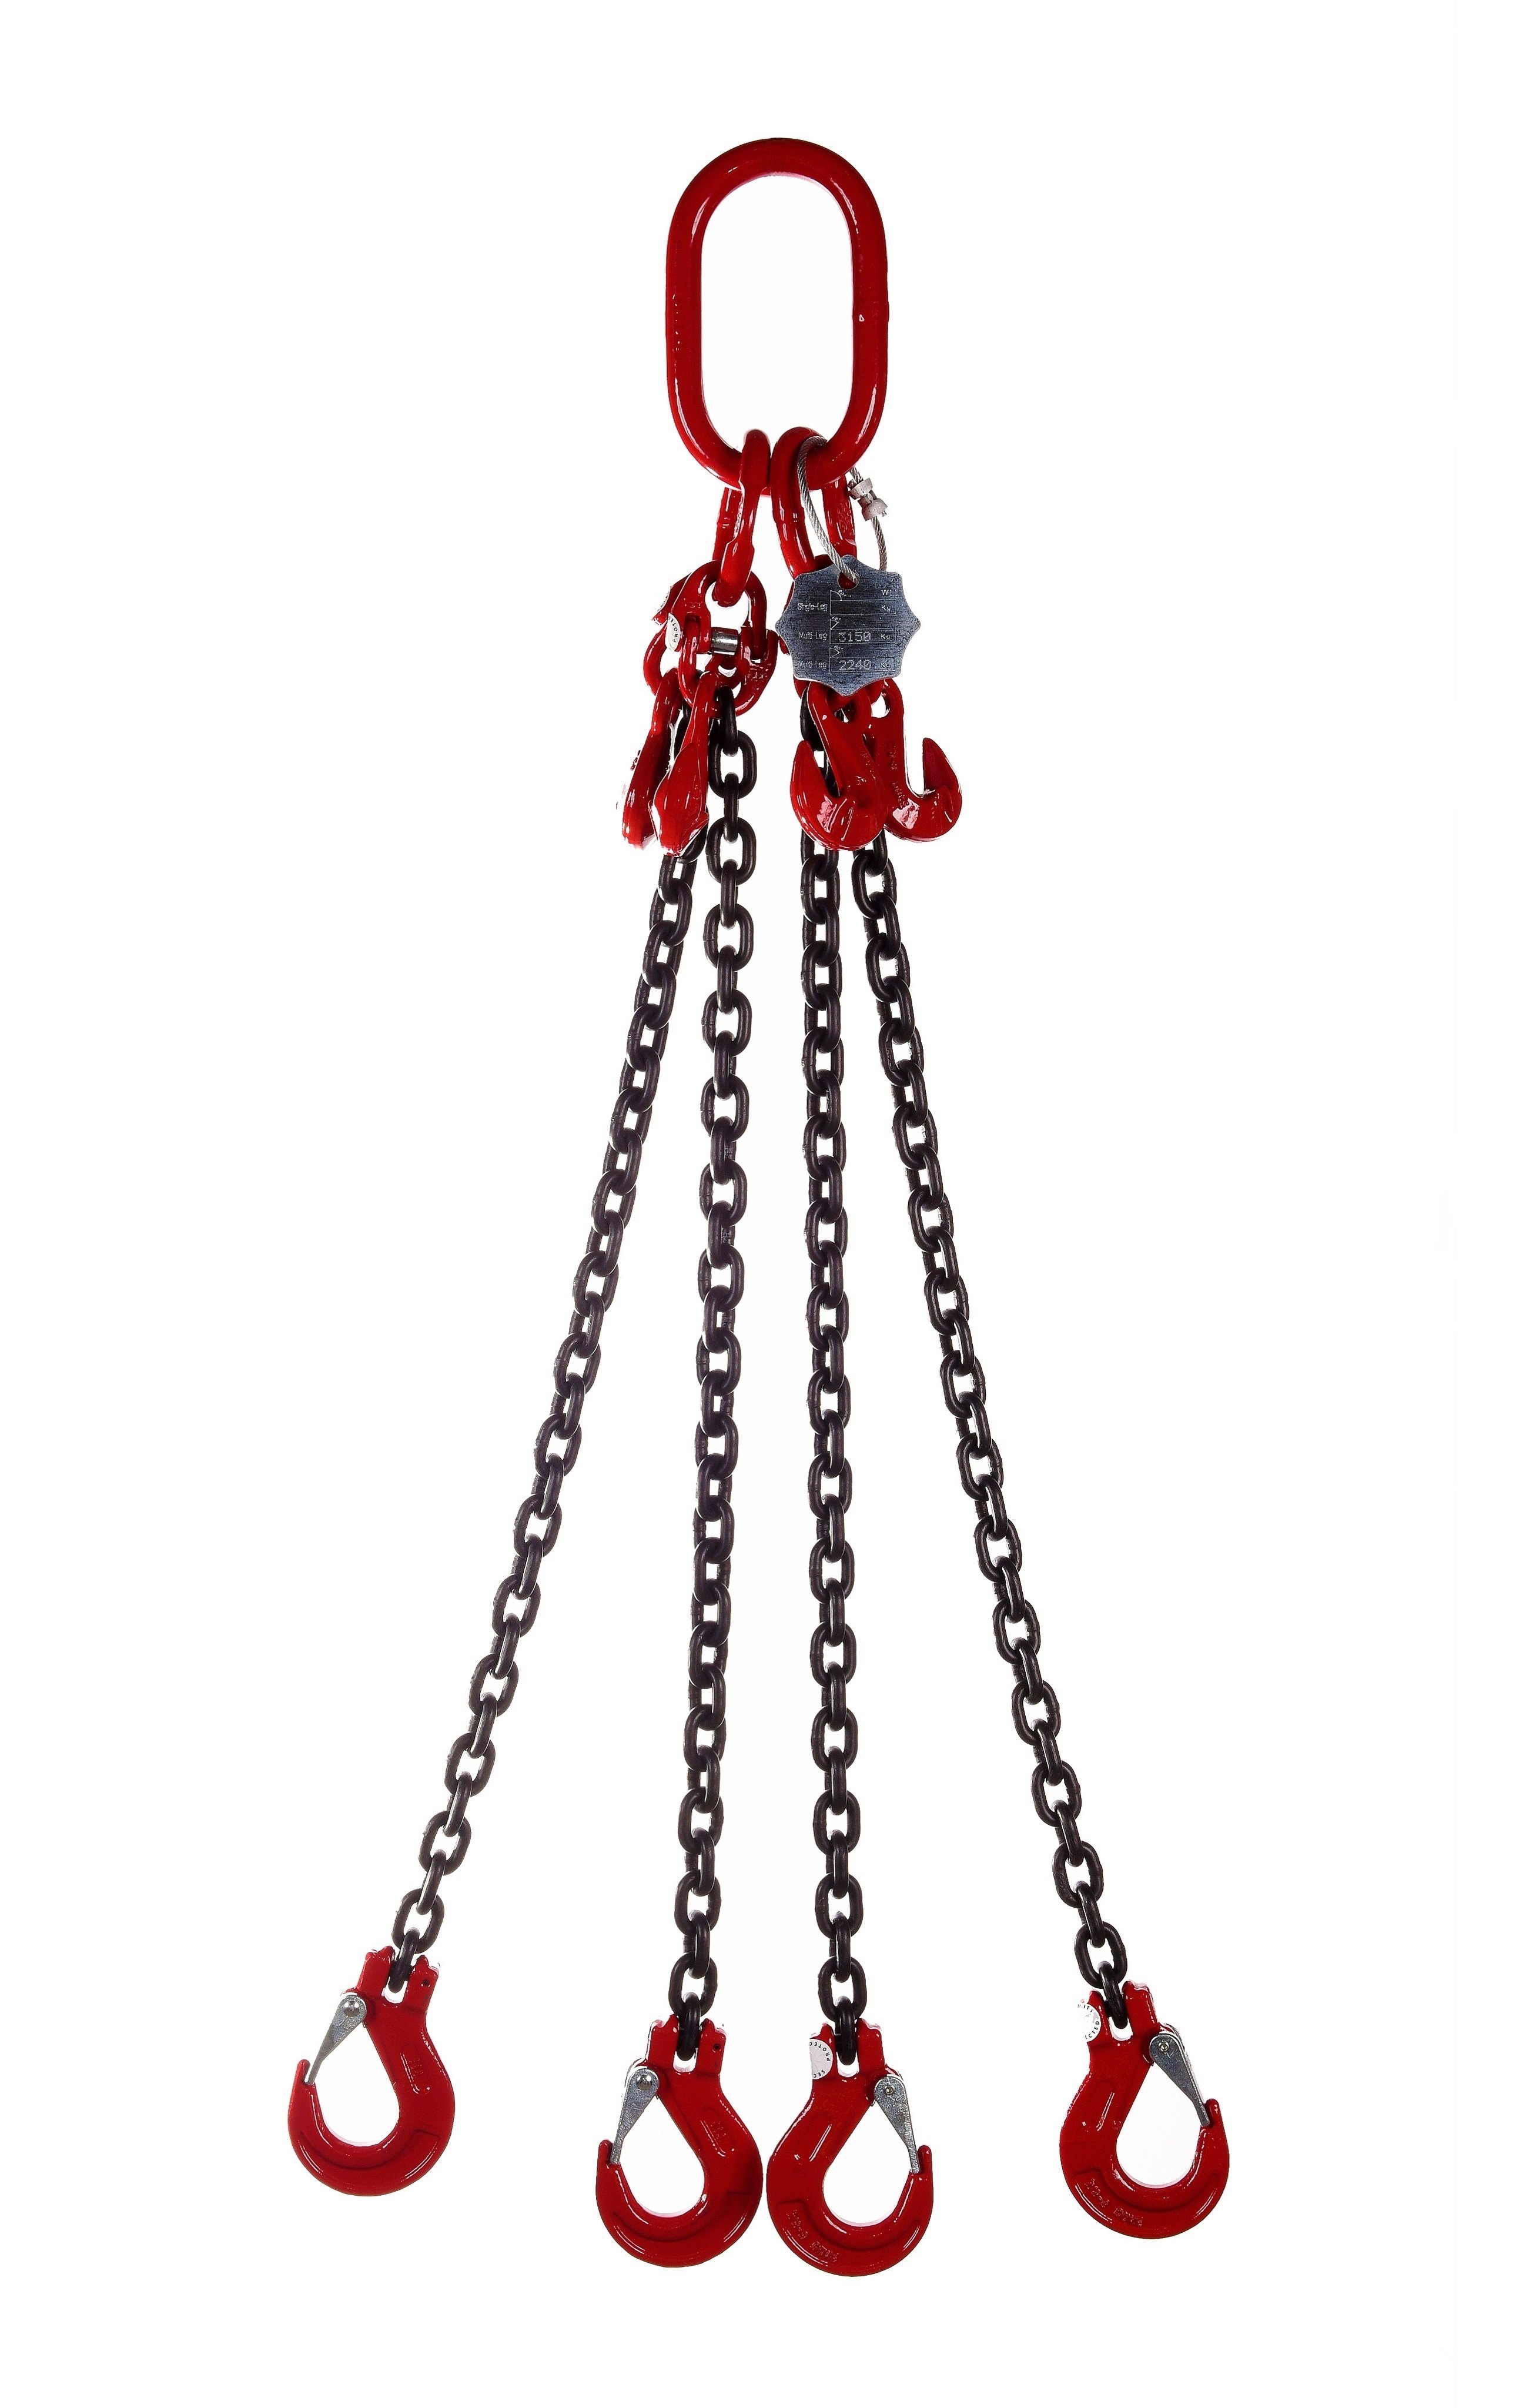 4 Leg 11.2tonne 13mm Lifting Chain Sling with choice of length and hooks – With Shortening Hook – 3mtr – Clevis Sling Hook – Chain Slings – WSB